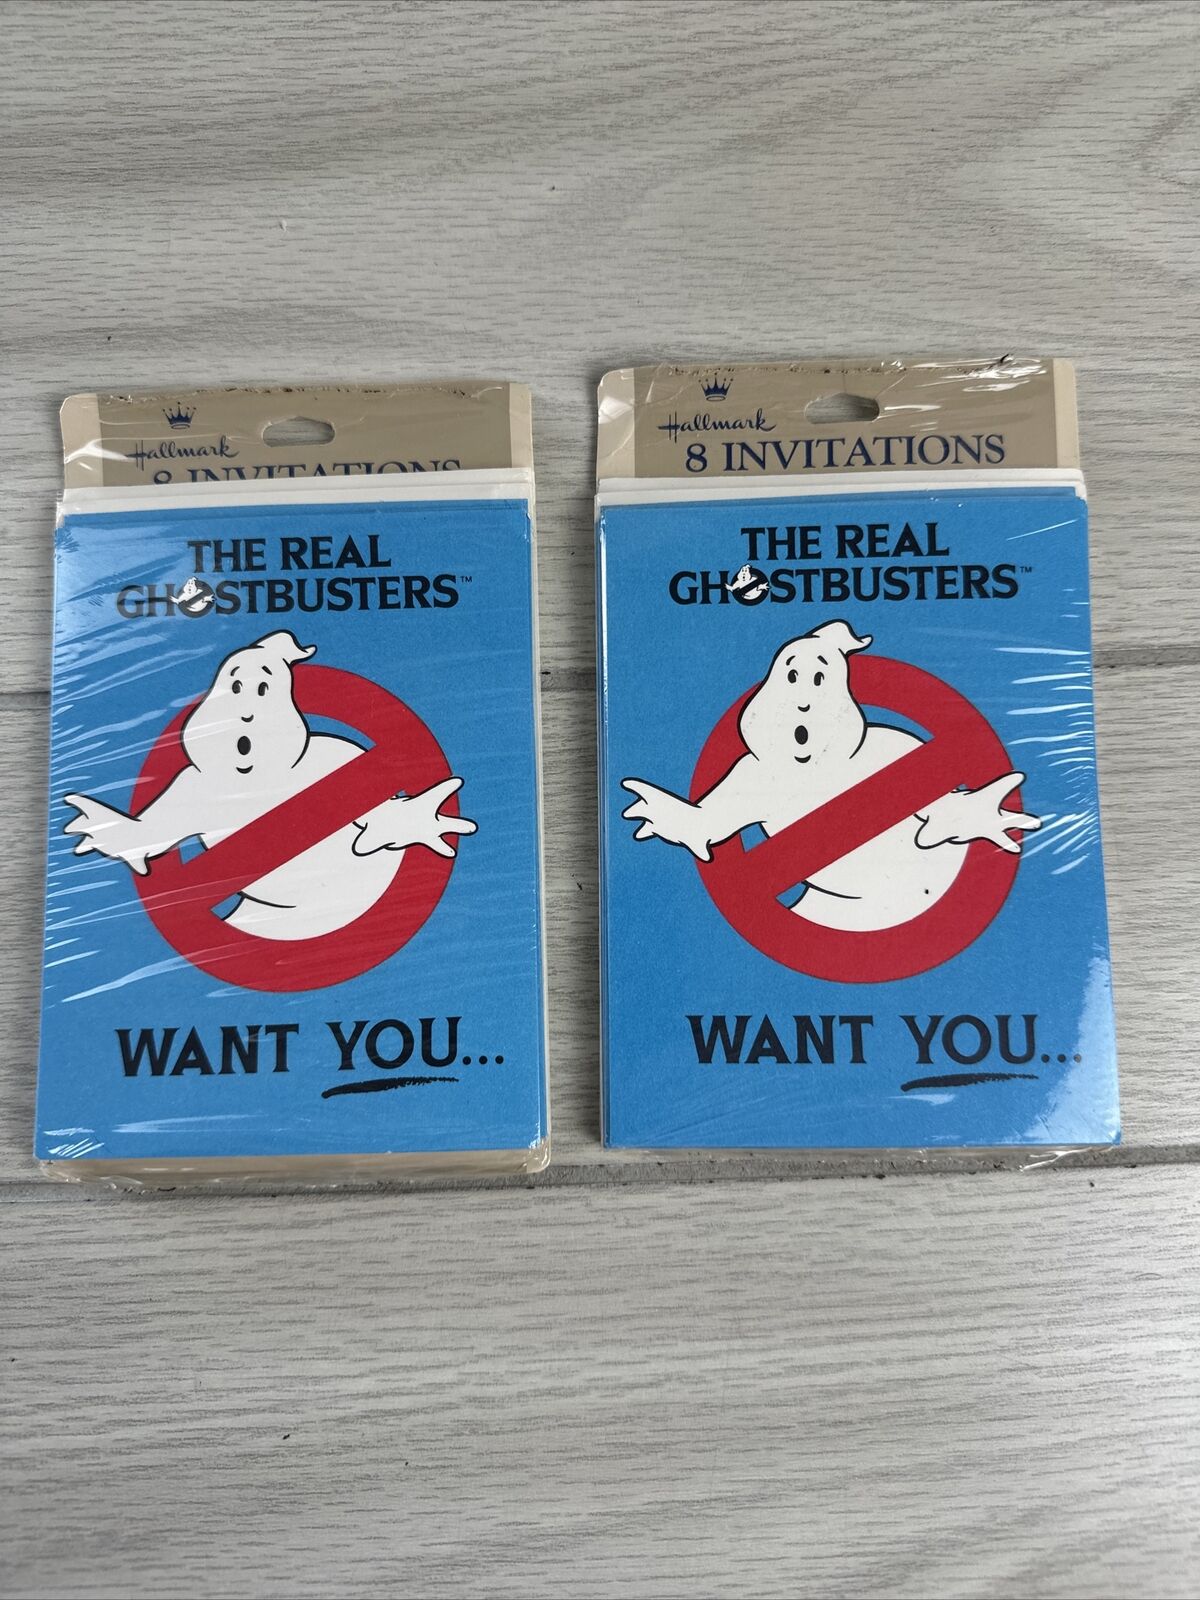 2 Pack (16) NEW VINTAGE The REAL GHOSTBUSTERS PARTY INVITATIONS from 1986